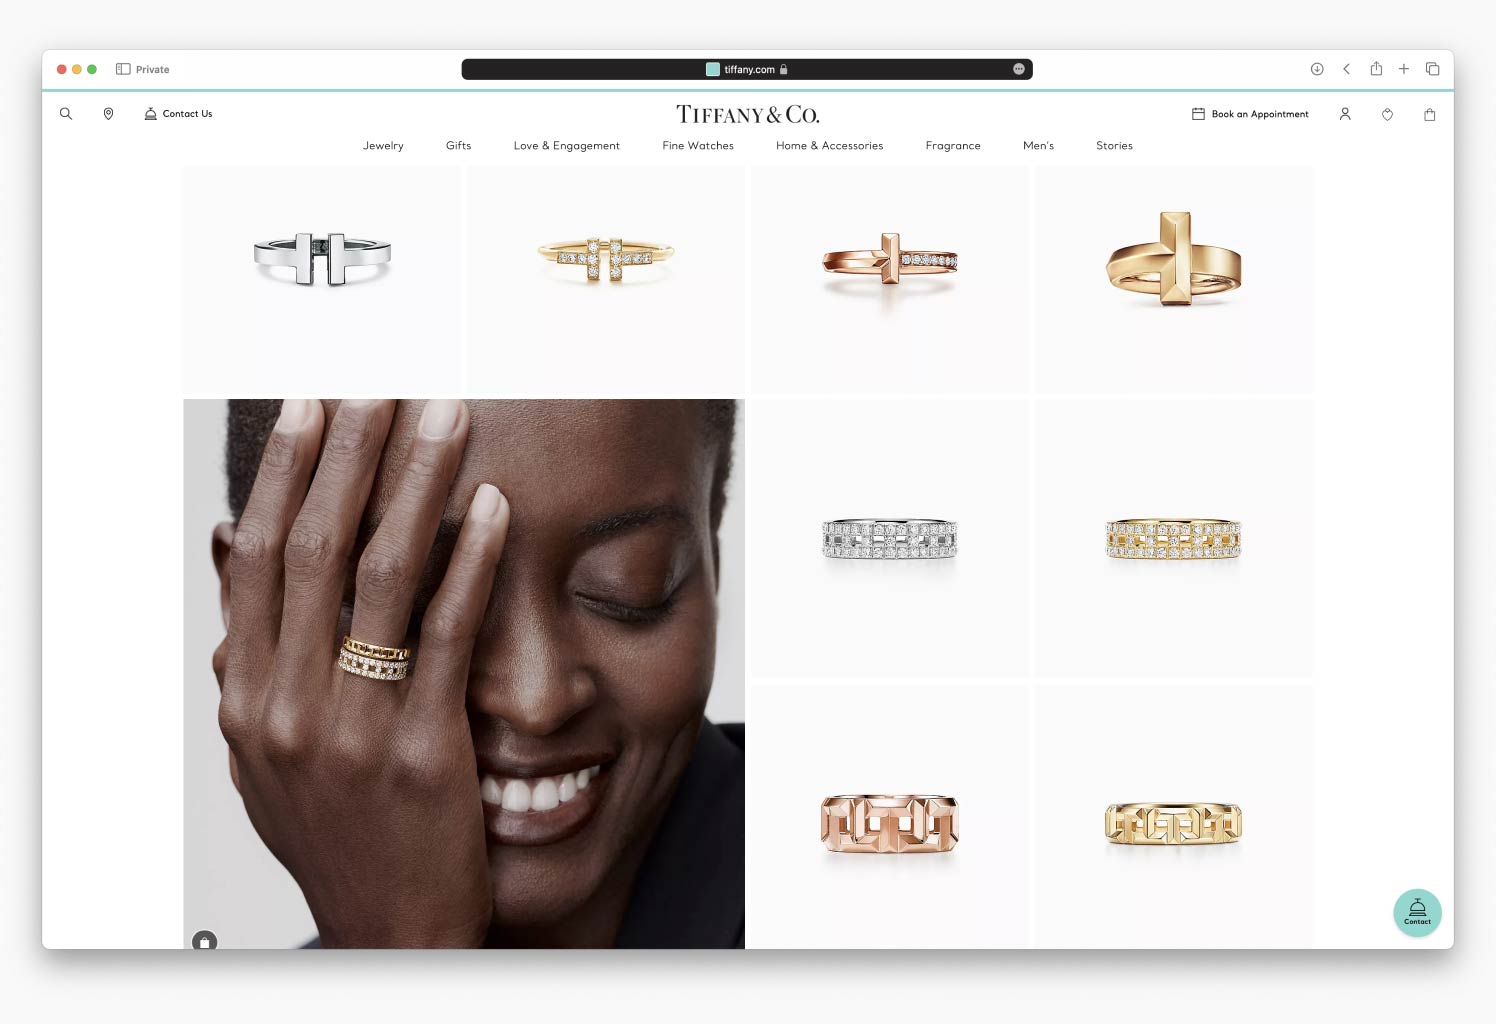 Challenges of selling jewelry online